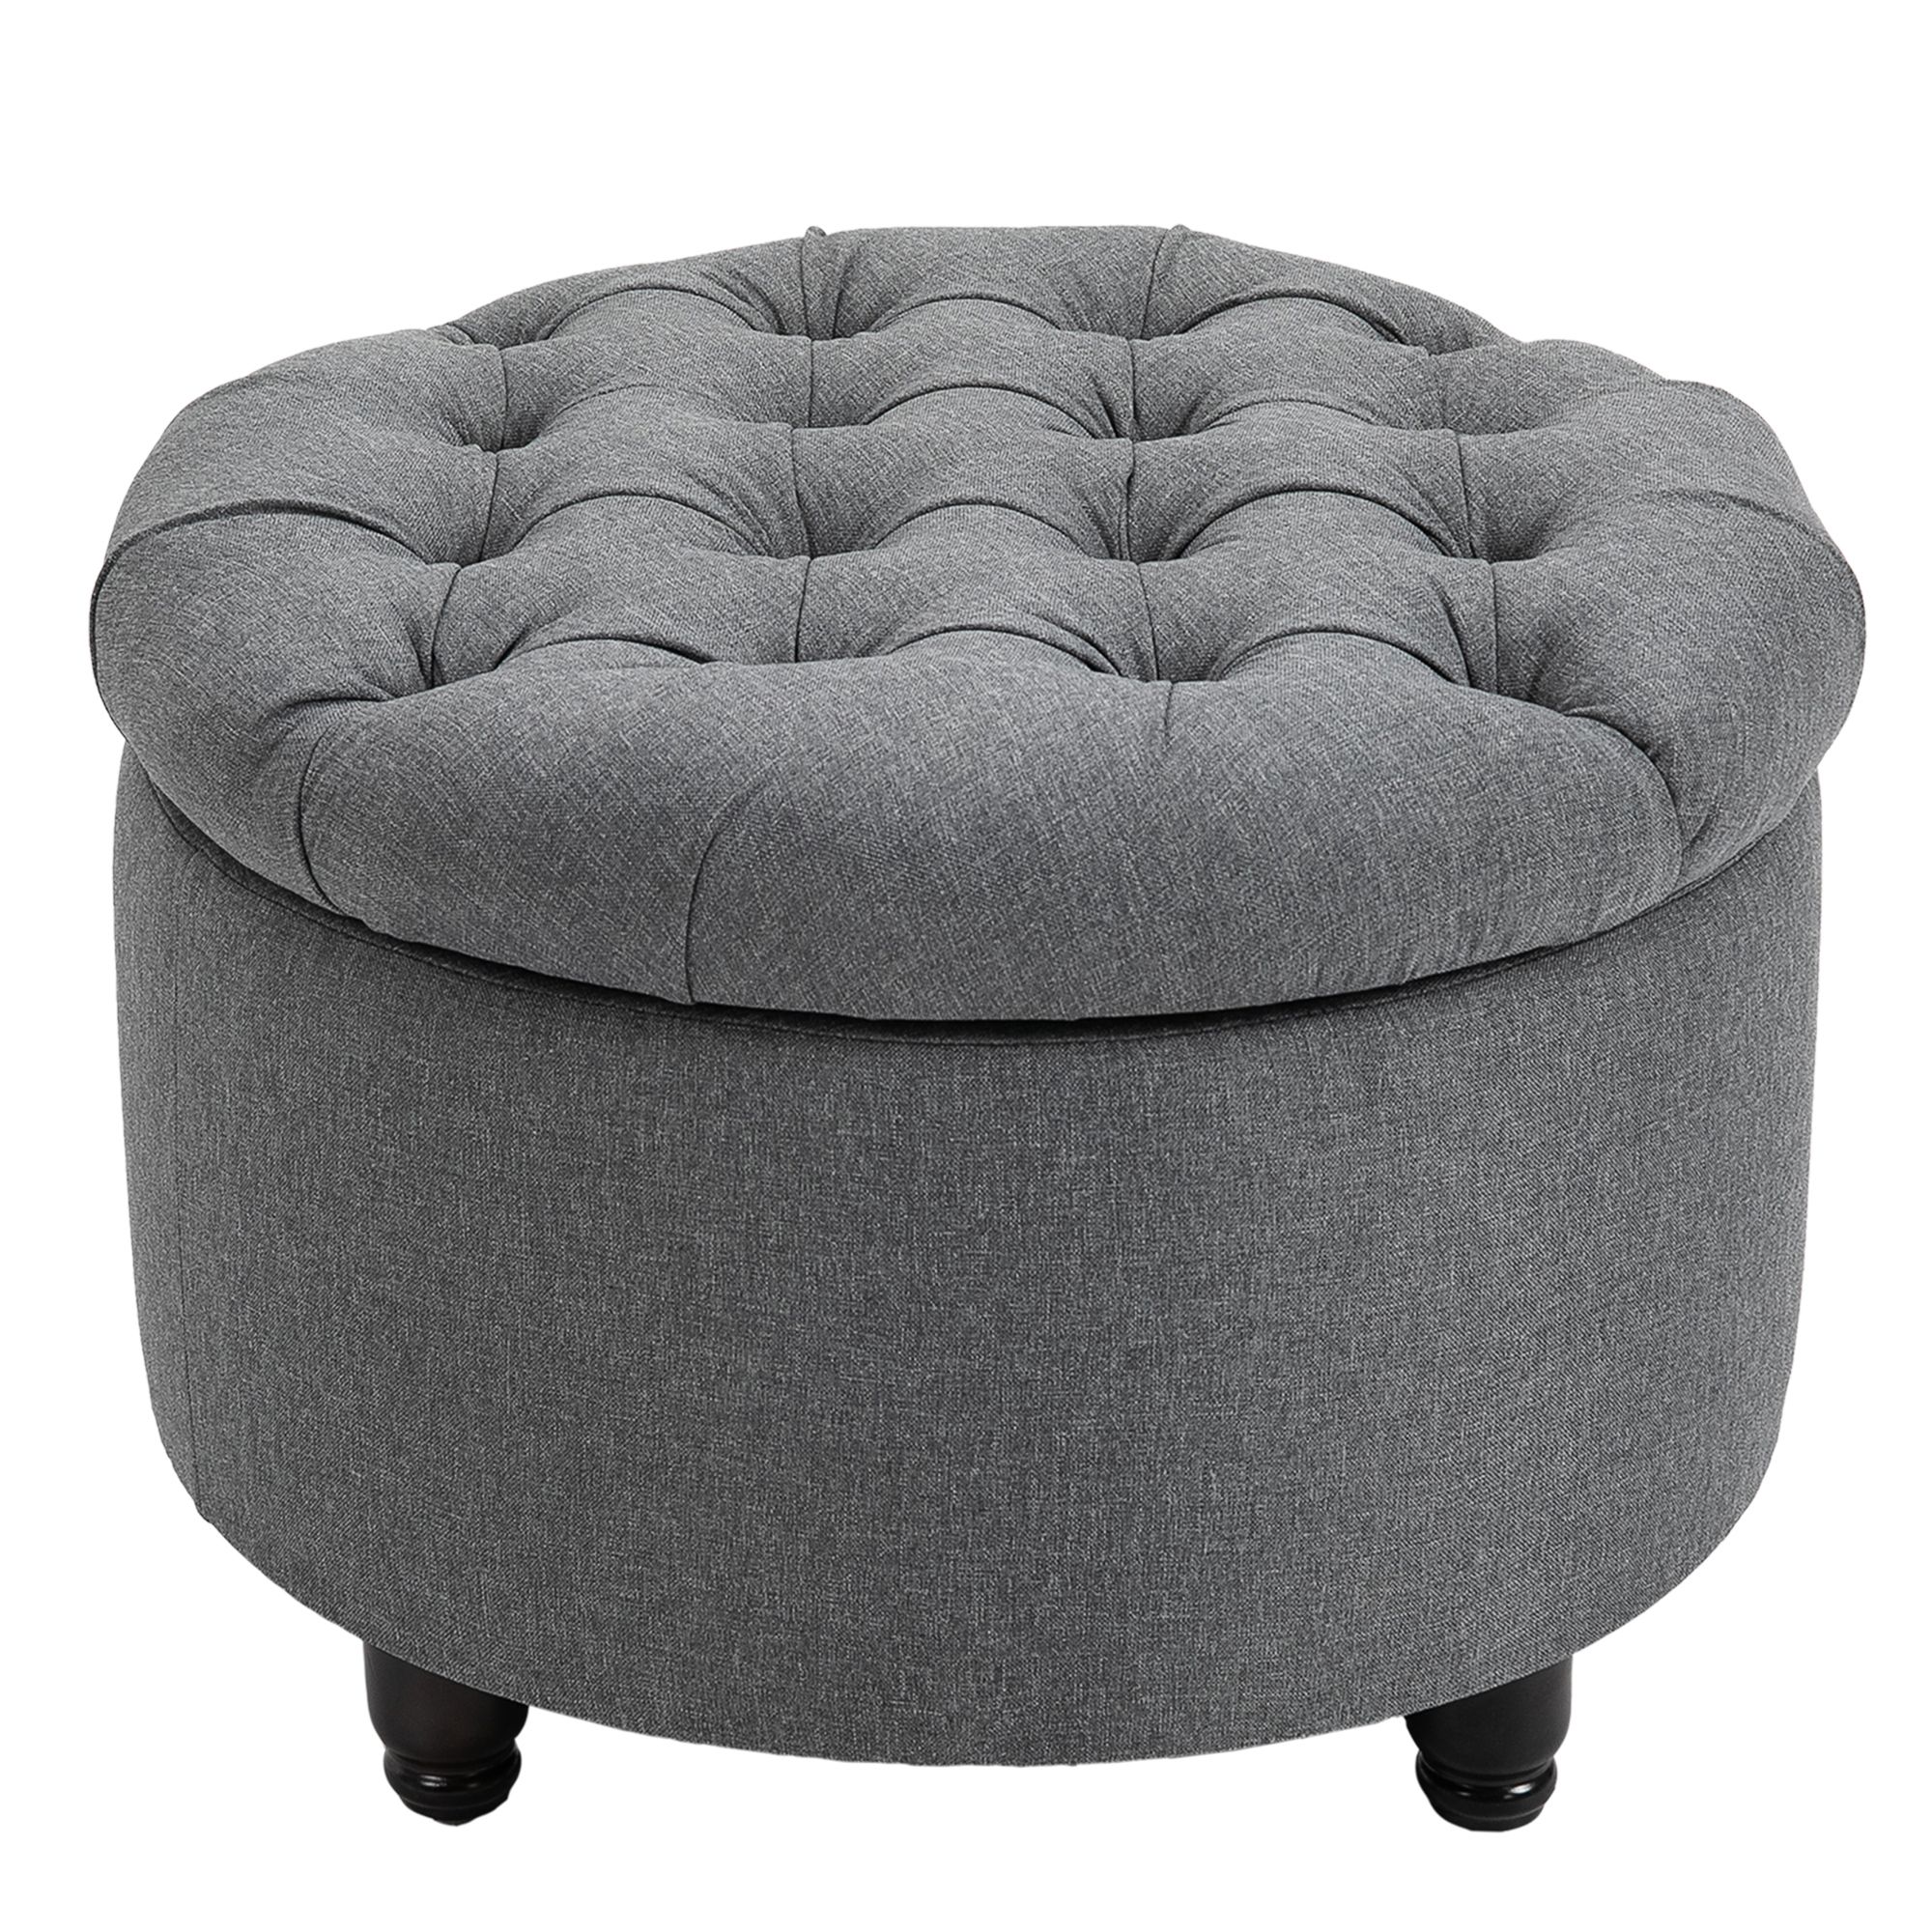 Homcom Round Linen Fabric Storage Ottoman Footstool With Removable Lid Inside Fabric Storage Ottomans (View 13 of 20)